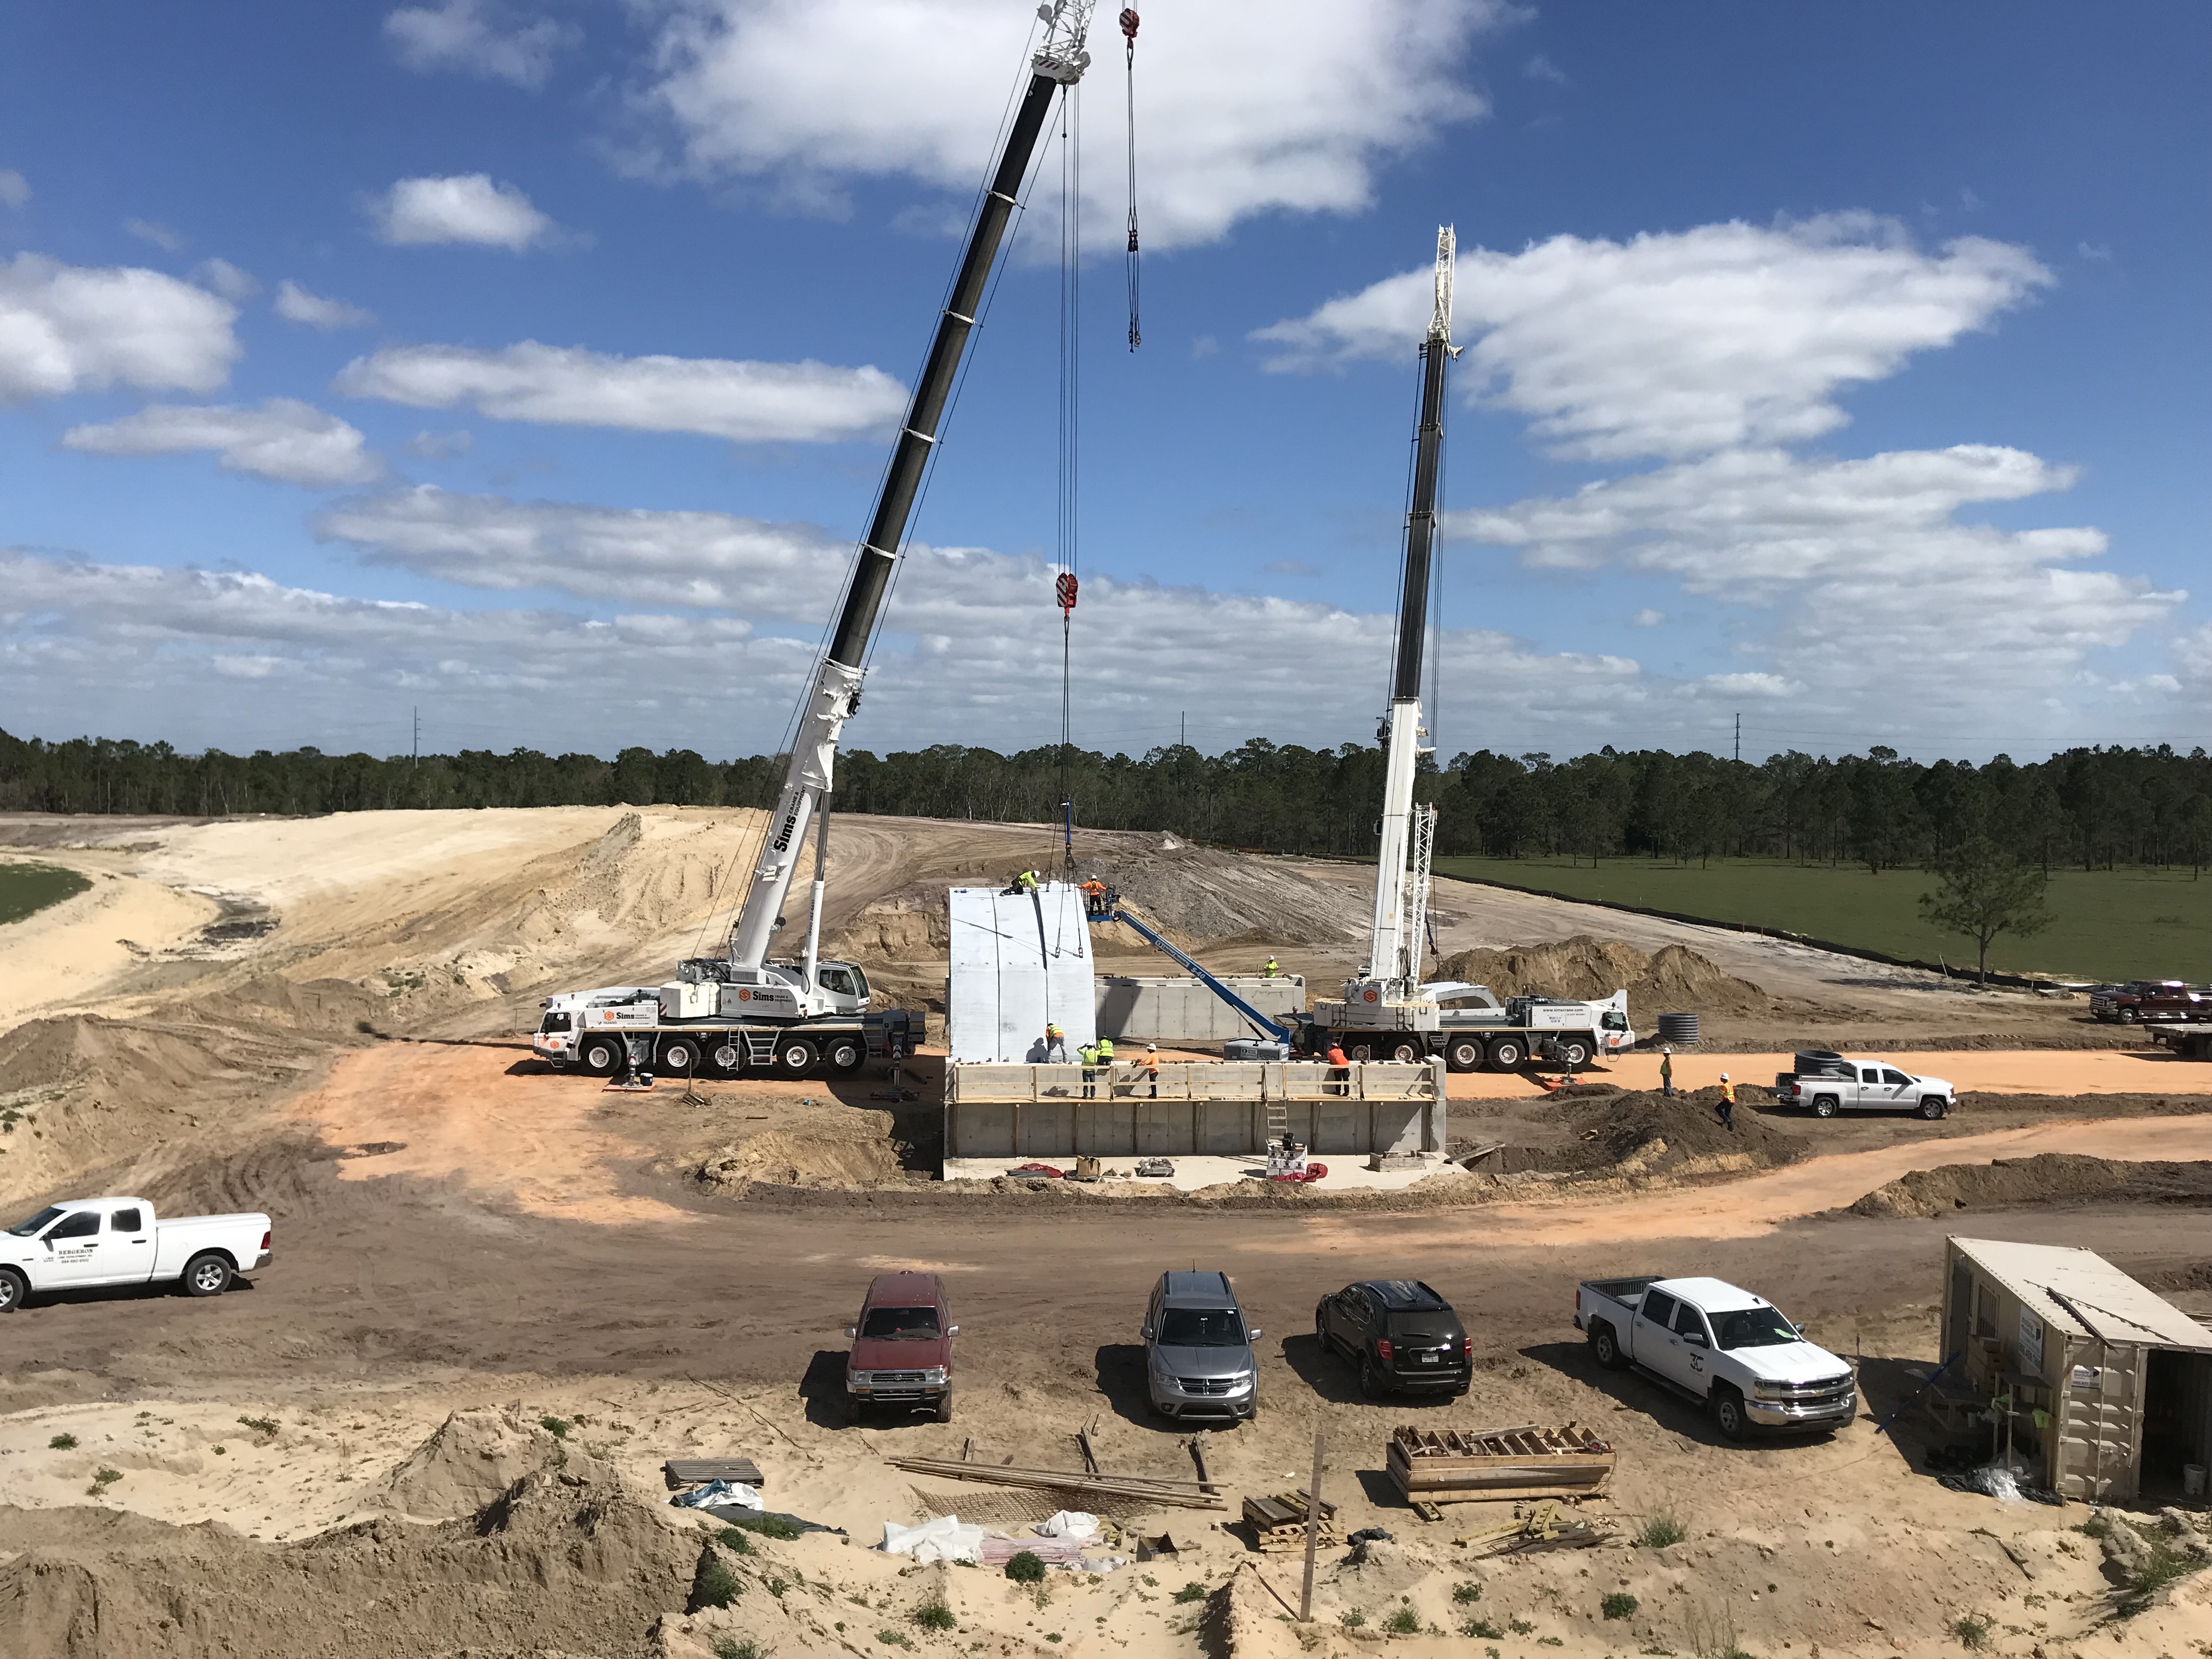 Bergeron Land Development's site development and roadway construction team at work constructing the SunTrax Test Facility.